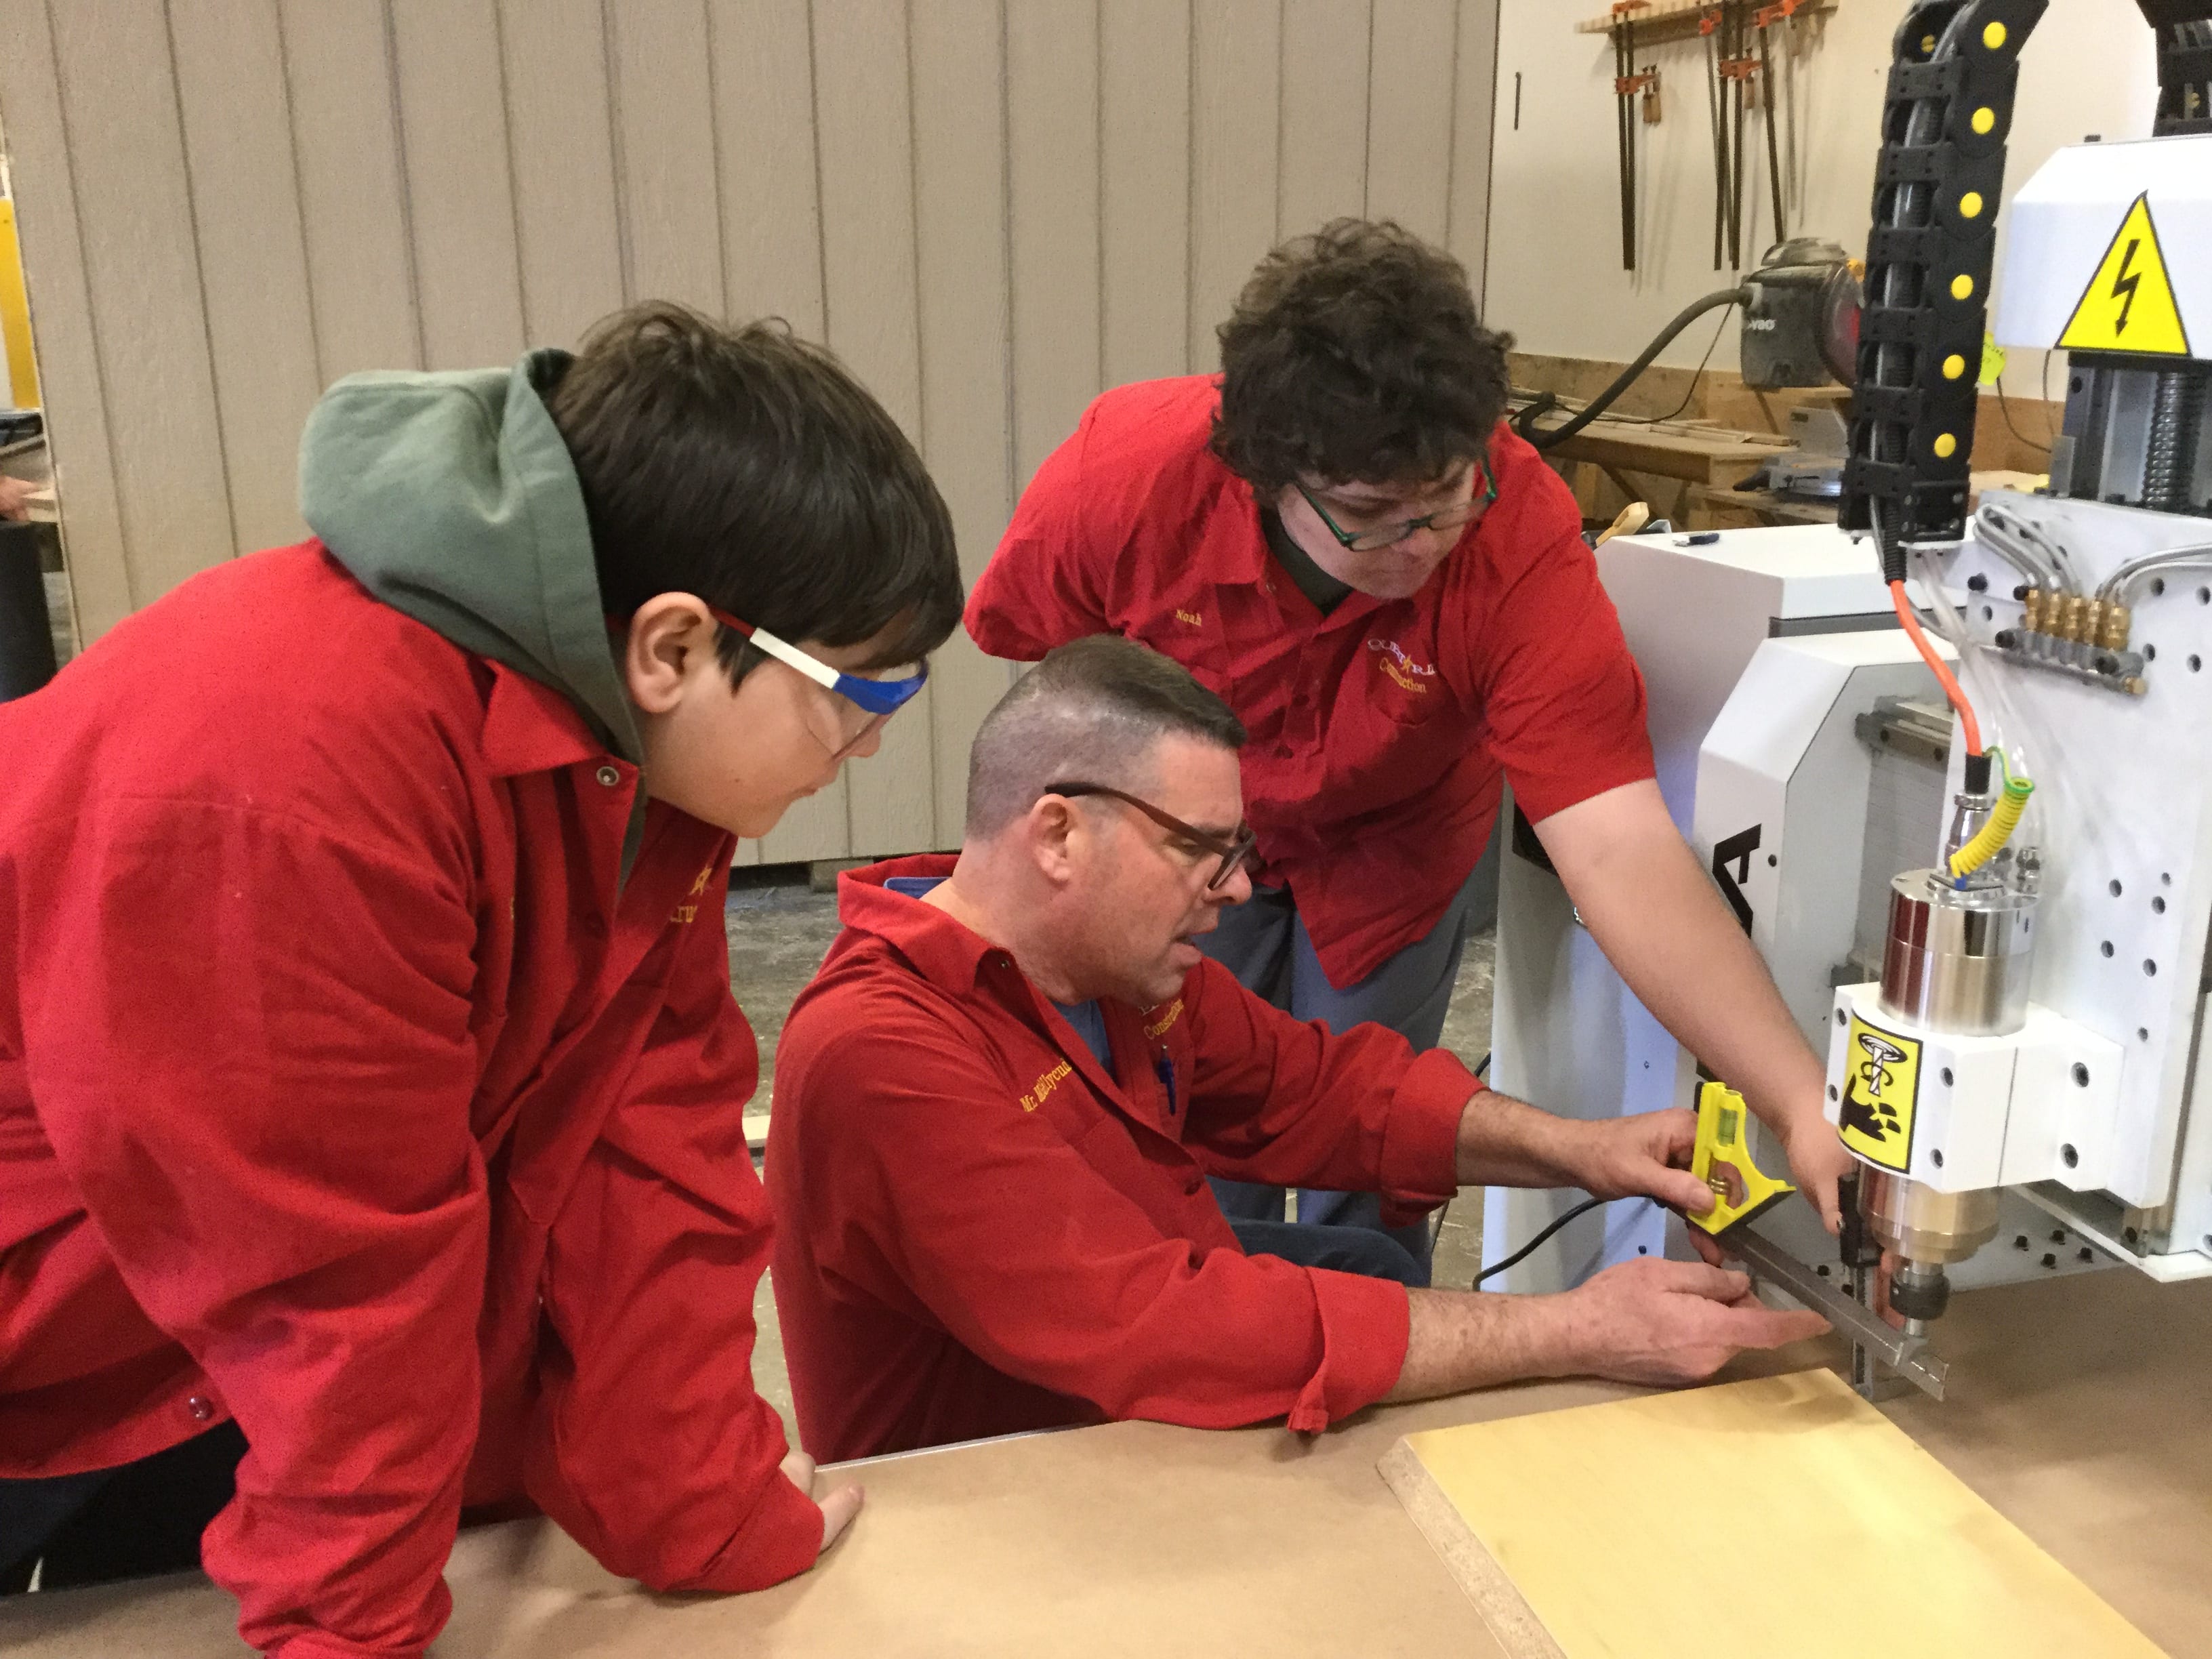 Image of three people in red workshirts working together on a CNC machine